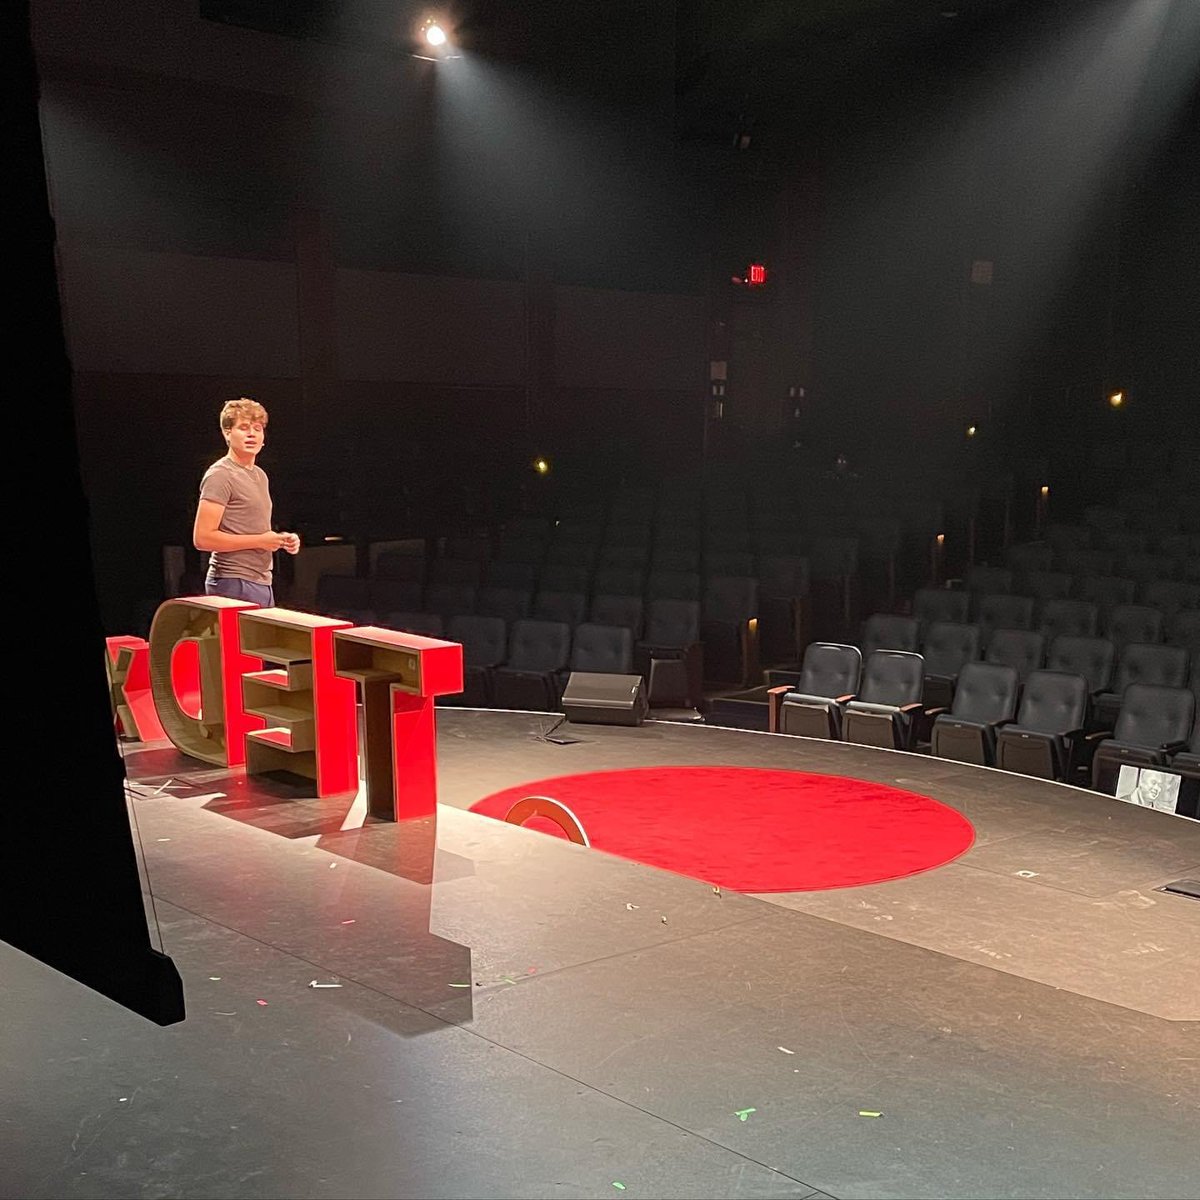 Maybe you play the lottery. Maybe you invest in the stock market. Maybe you like playing games of chance. Have you ever really considered what luck really is? Judah Gordon has. At #tedxgoshen he will pose interesting thoughts about luck, skill, and what makes people successful.